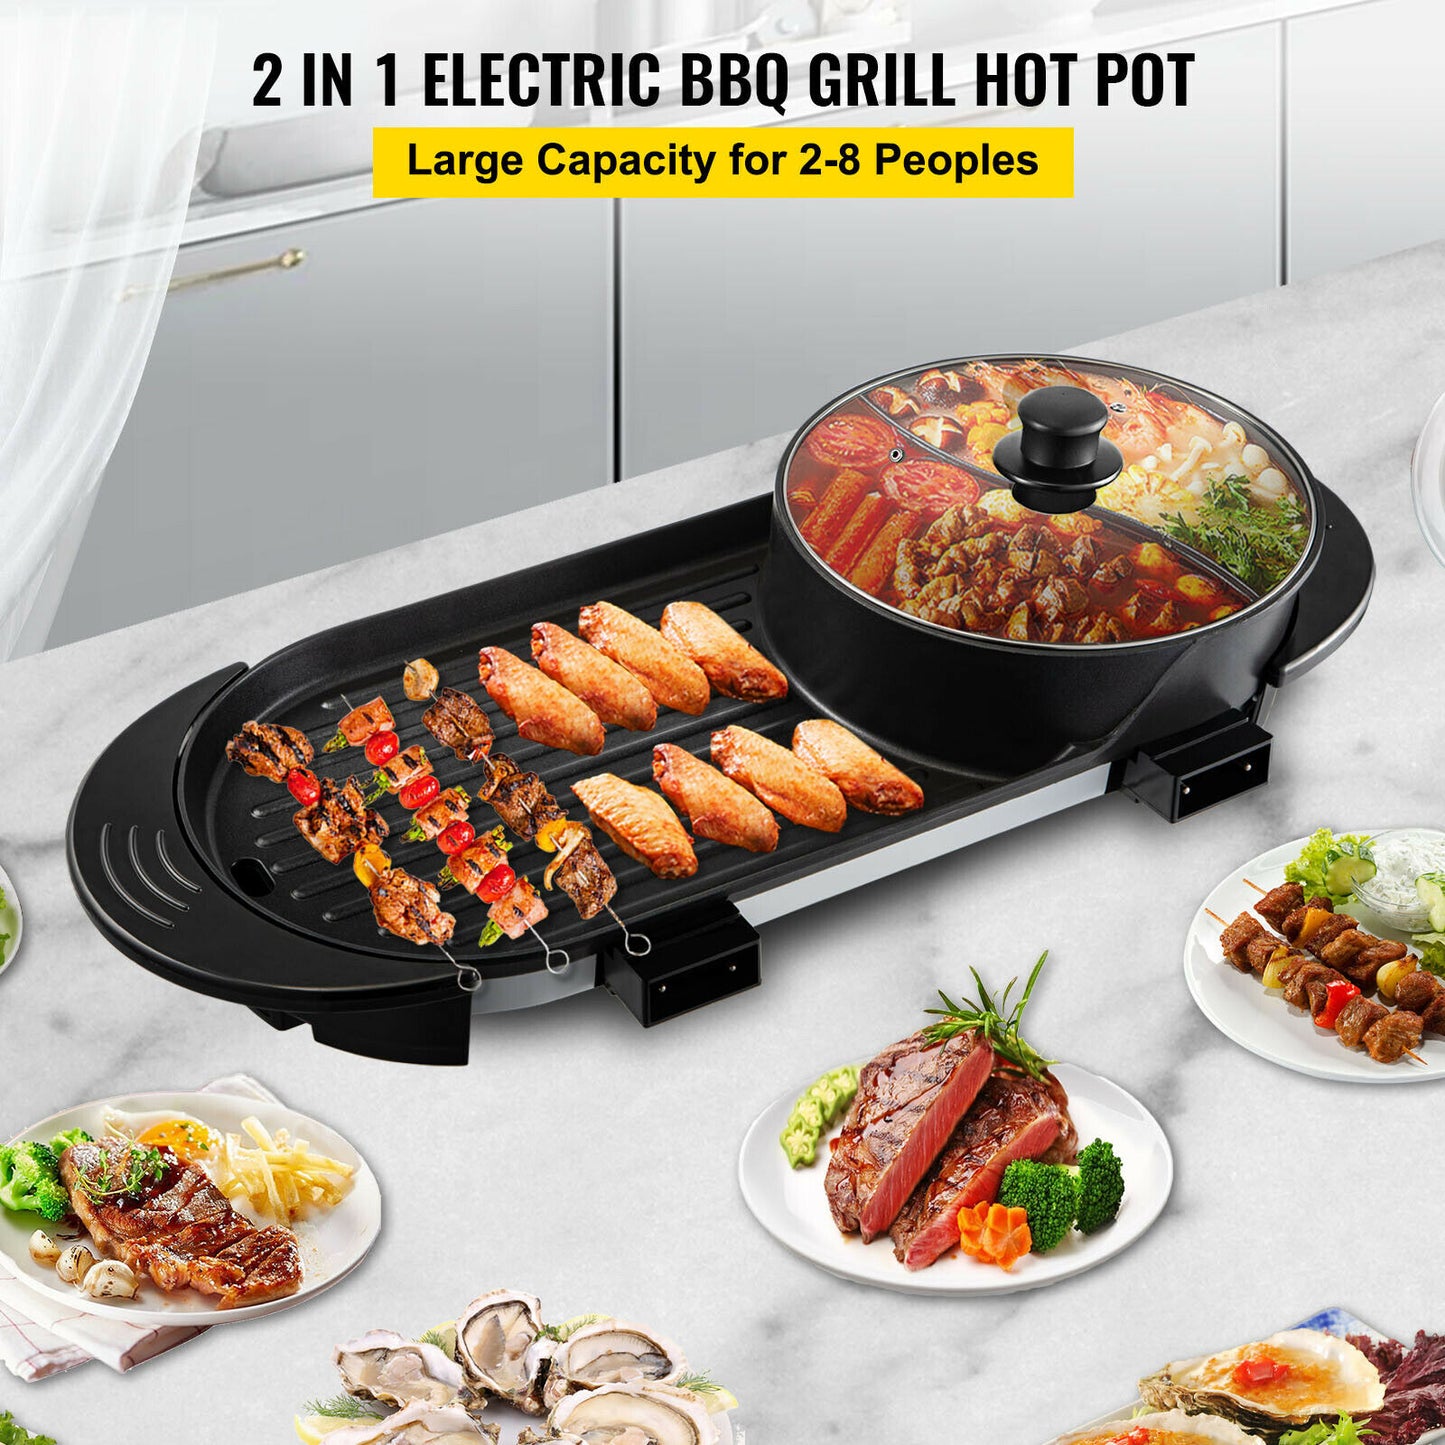 2 in 1 Electric BBQ Grill Hot Pot Smokeless Durable, Even Heated